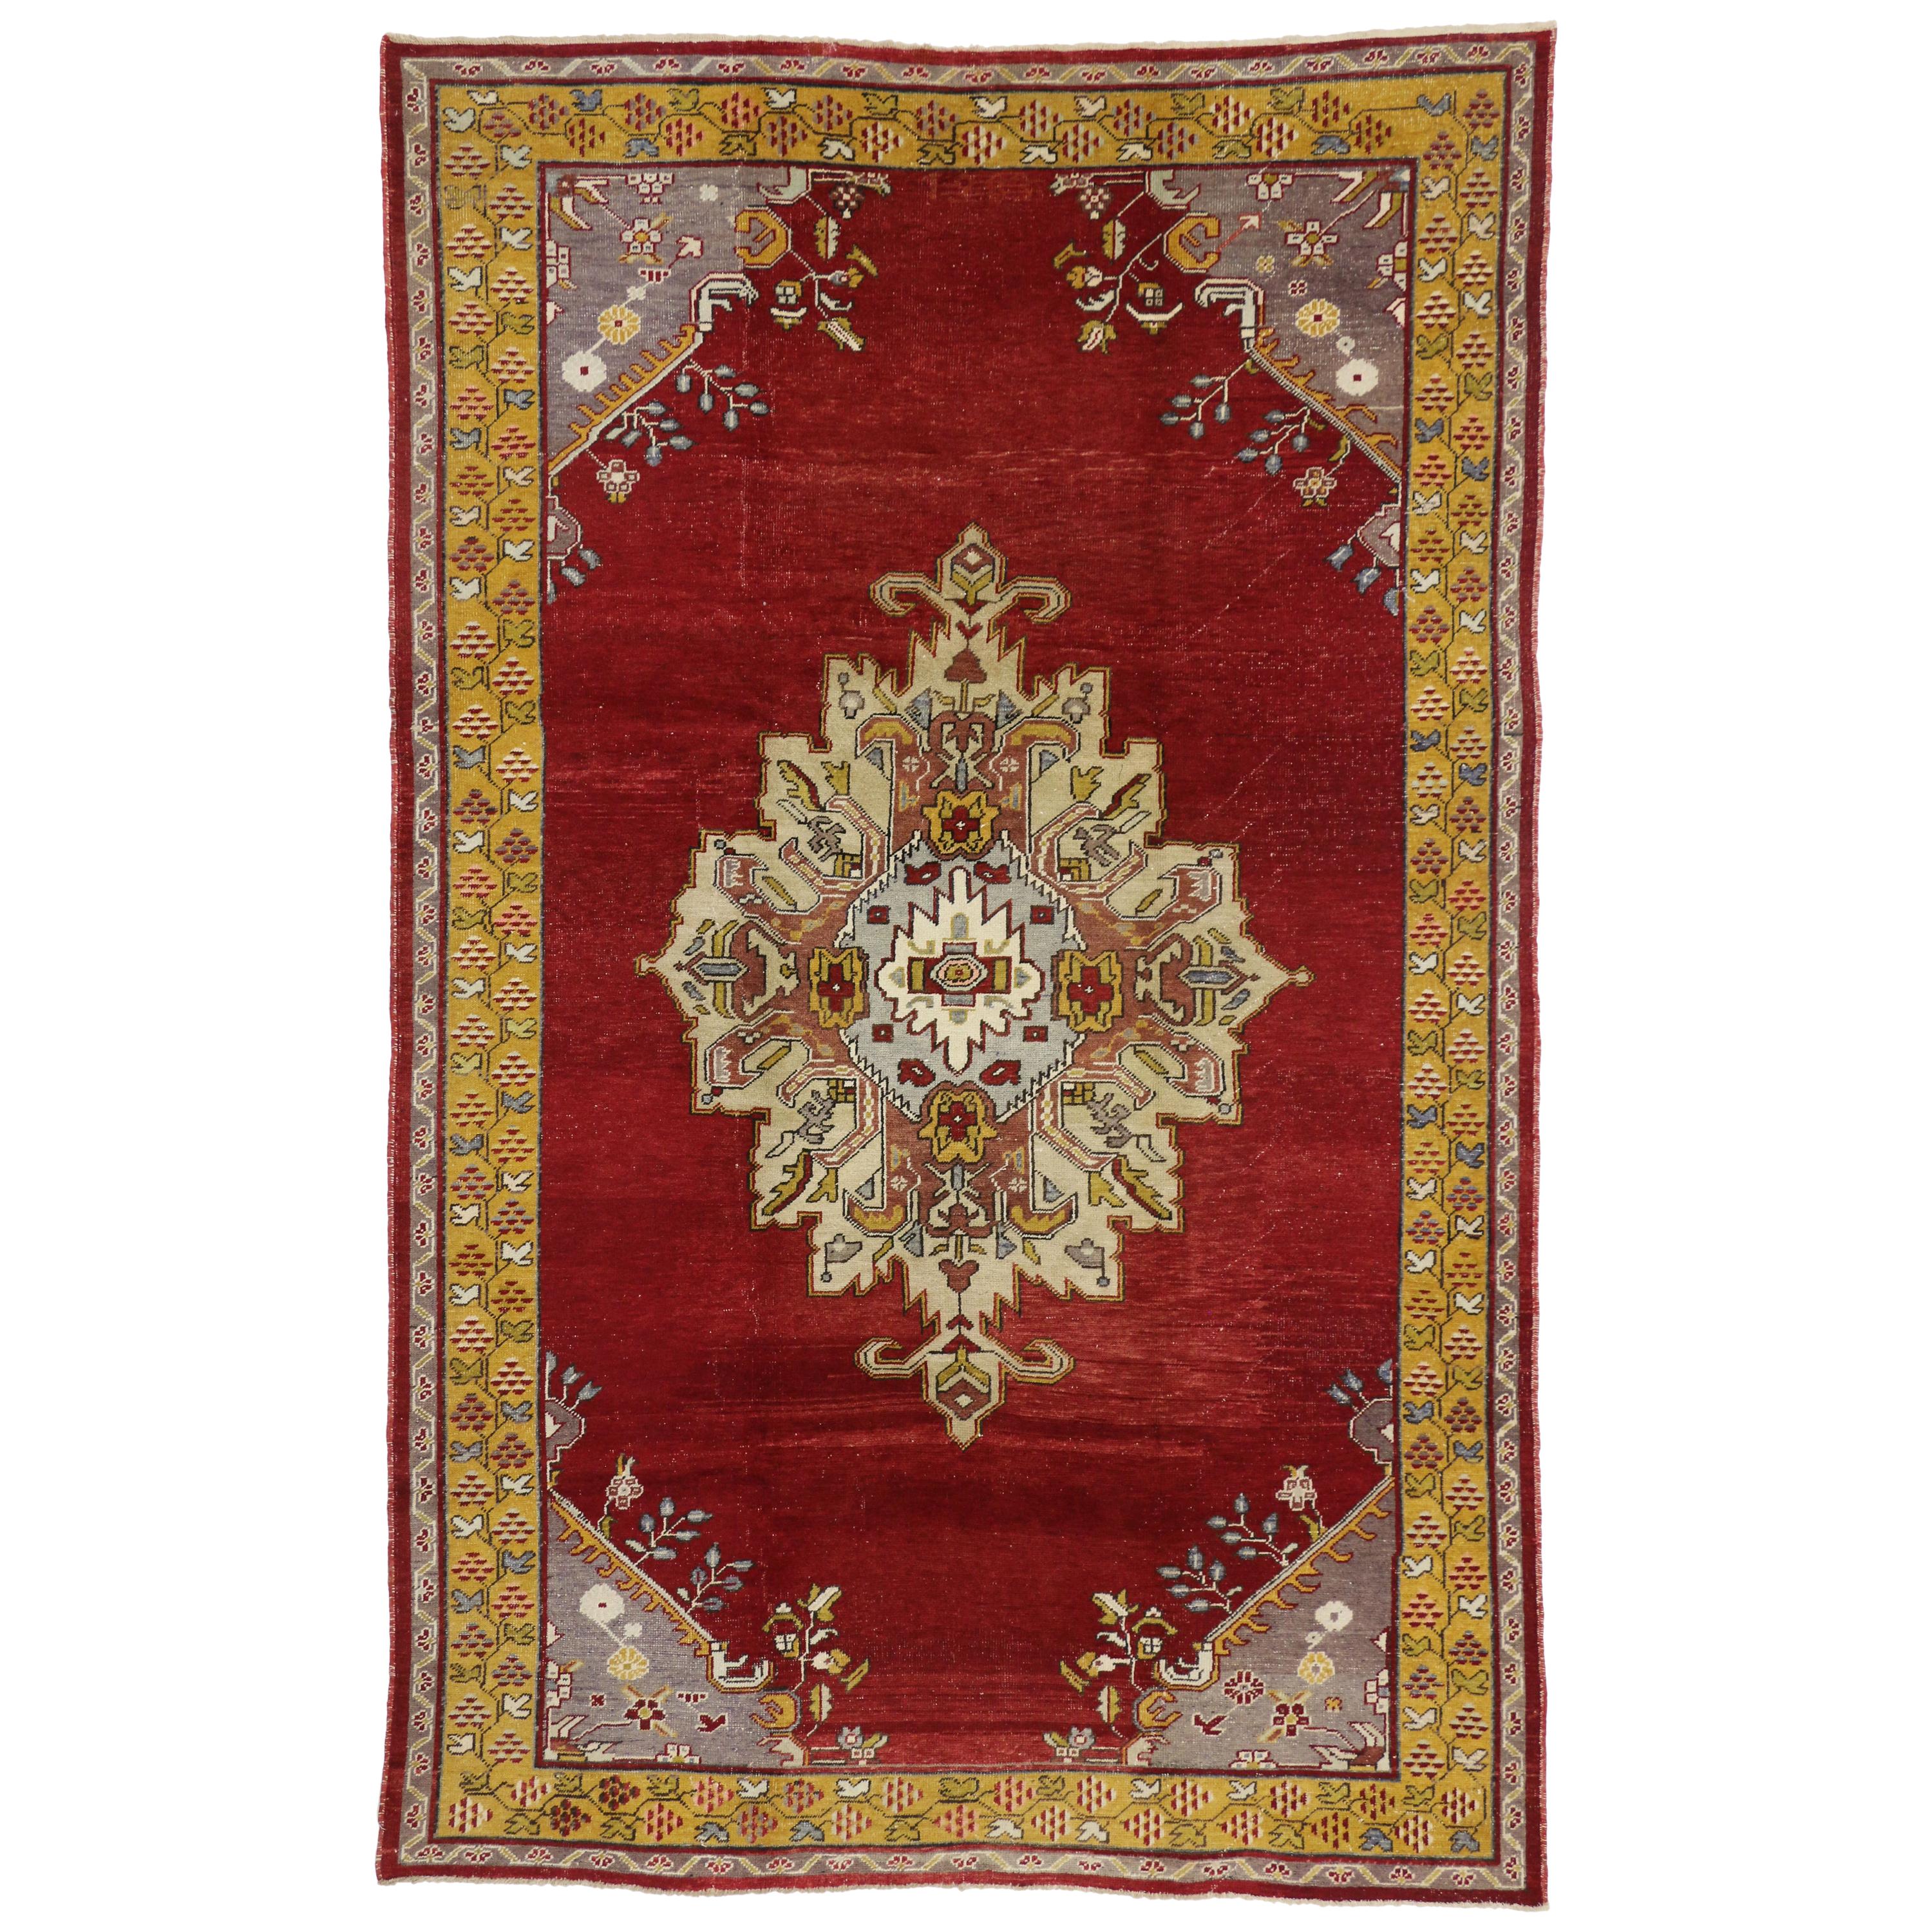 Vintage Turkish Oushak Rug with Regency Queen Anne Style and Vibrant Colors